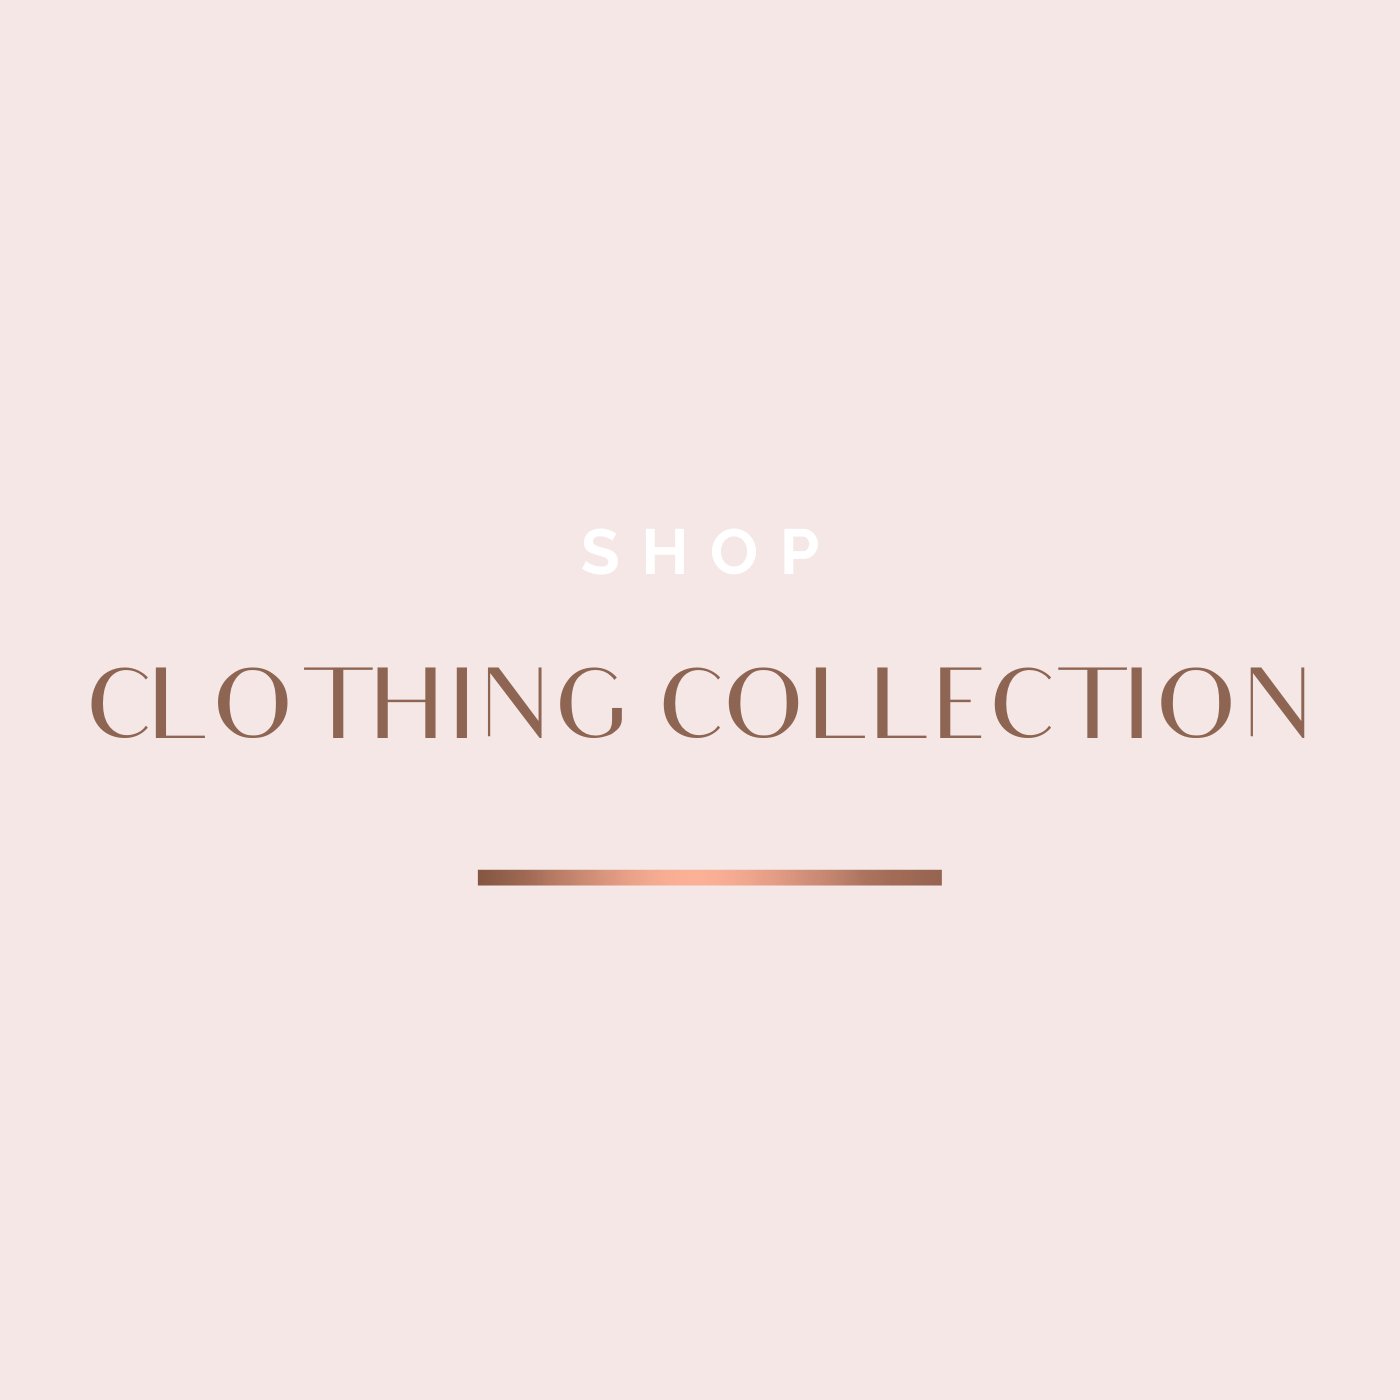 The Clothing Collection